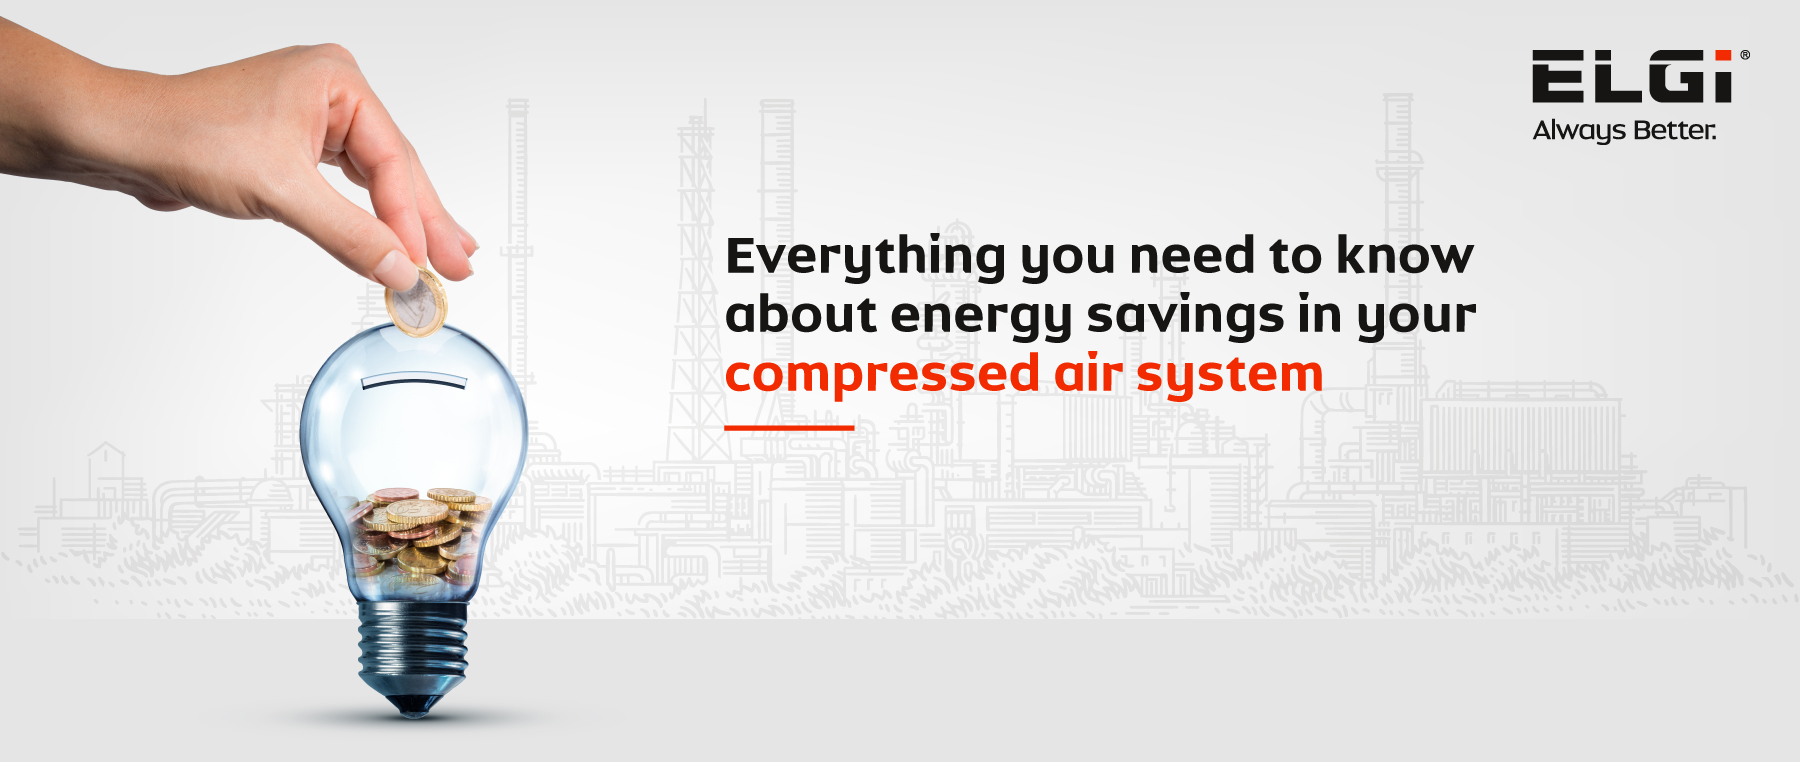 Everything you need to know about energy savings in your compressed air system